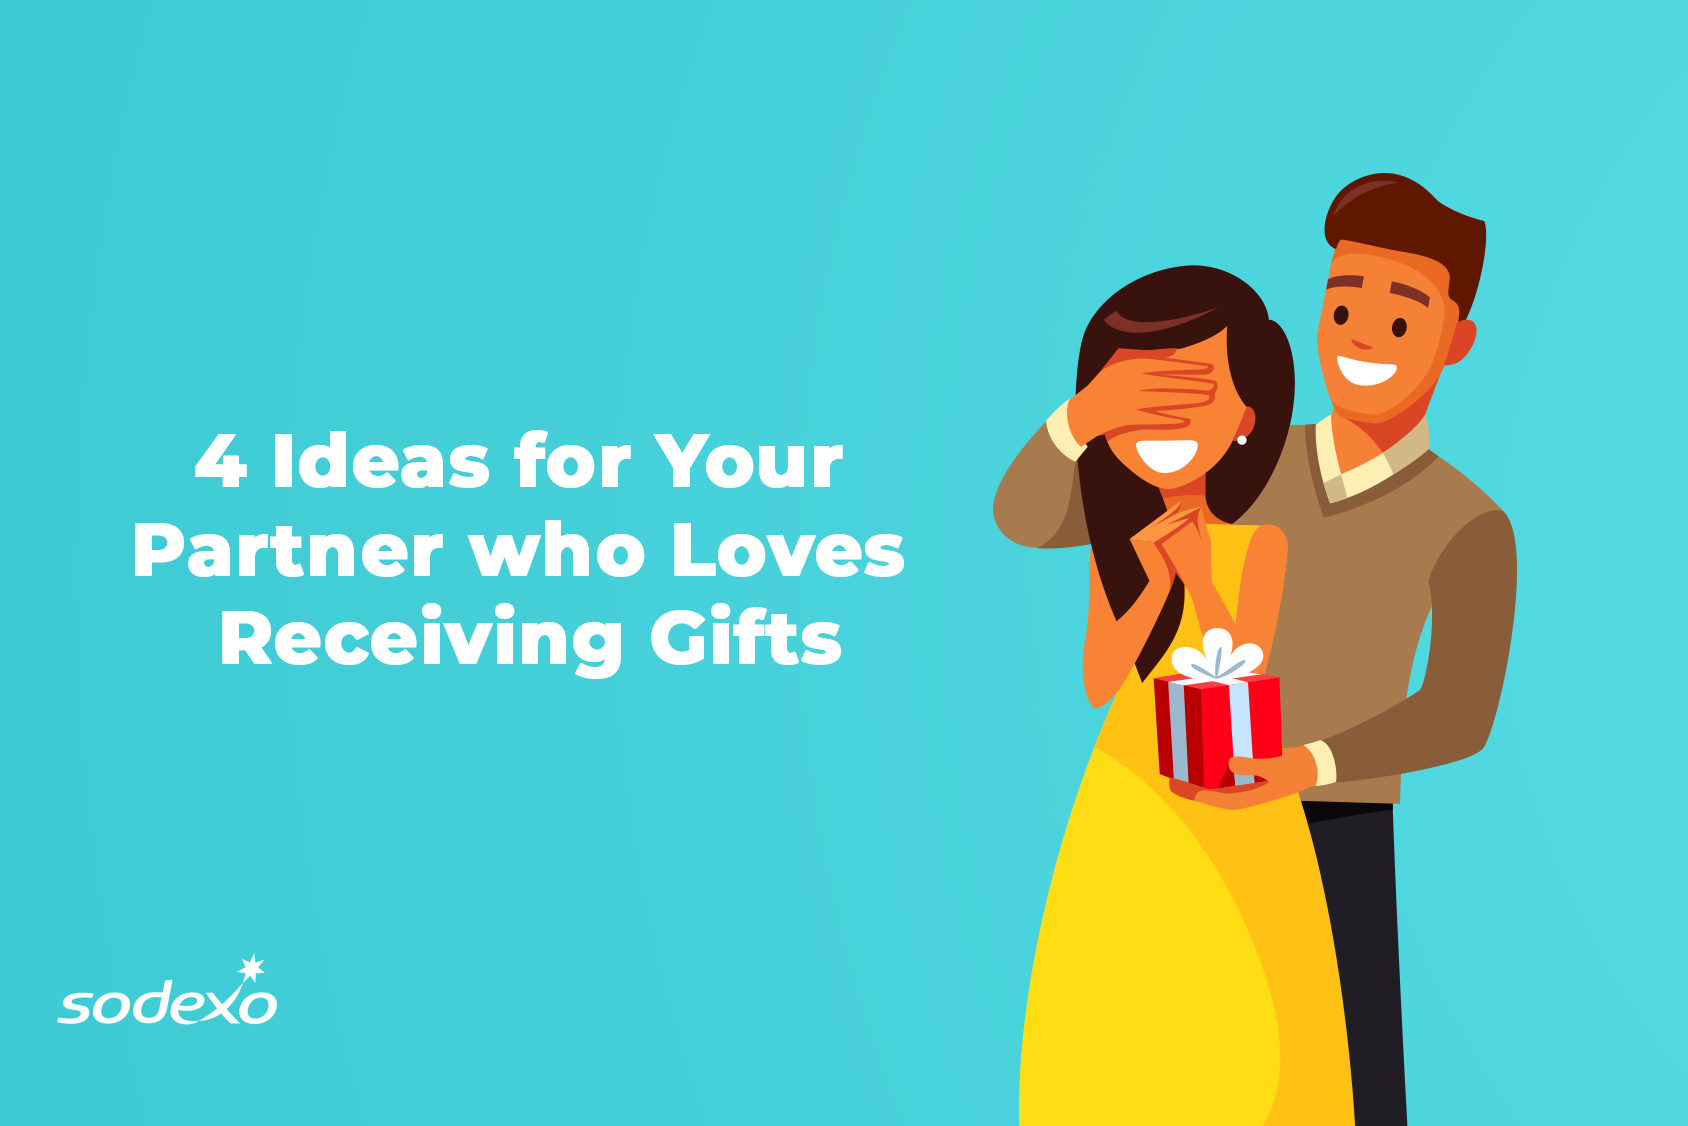 4 Ideas for Your Partner who Loves Giving and Receiving Gifts